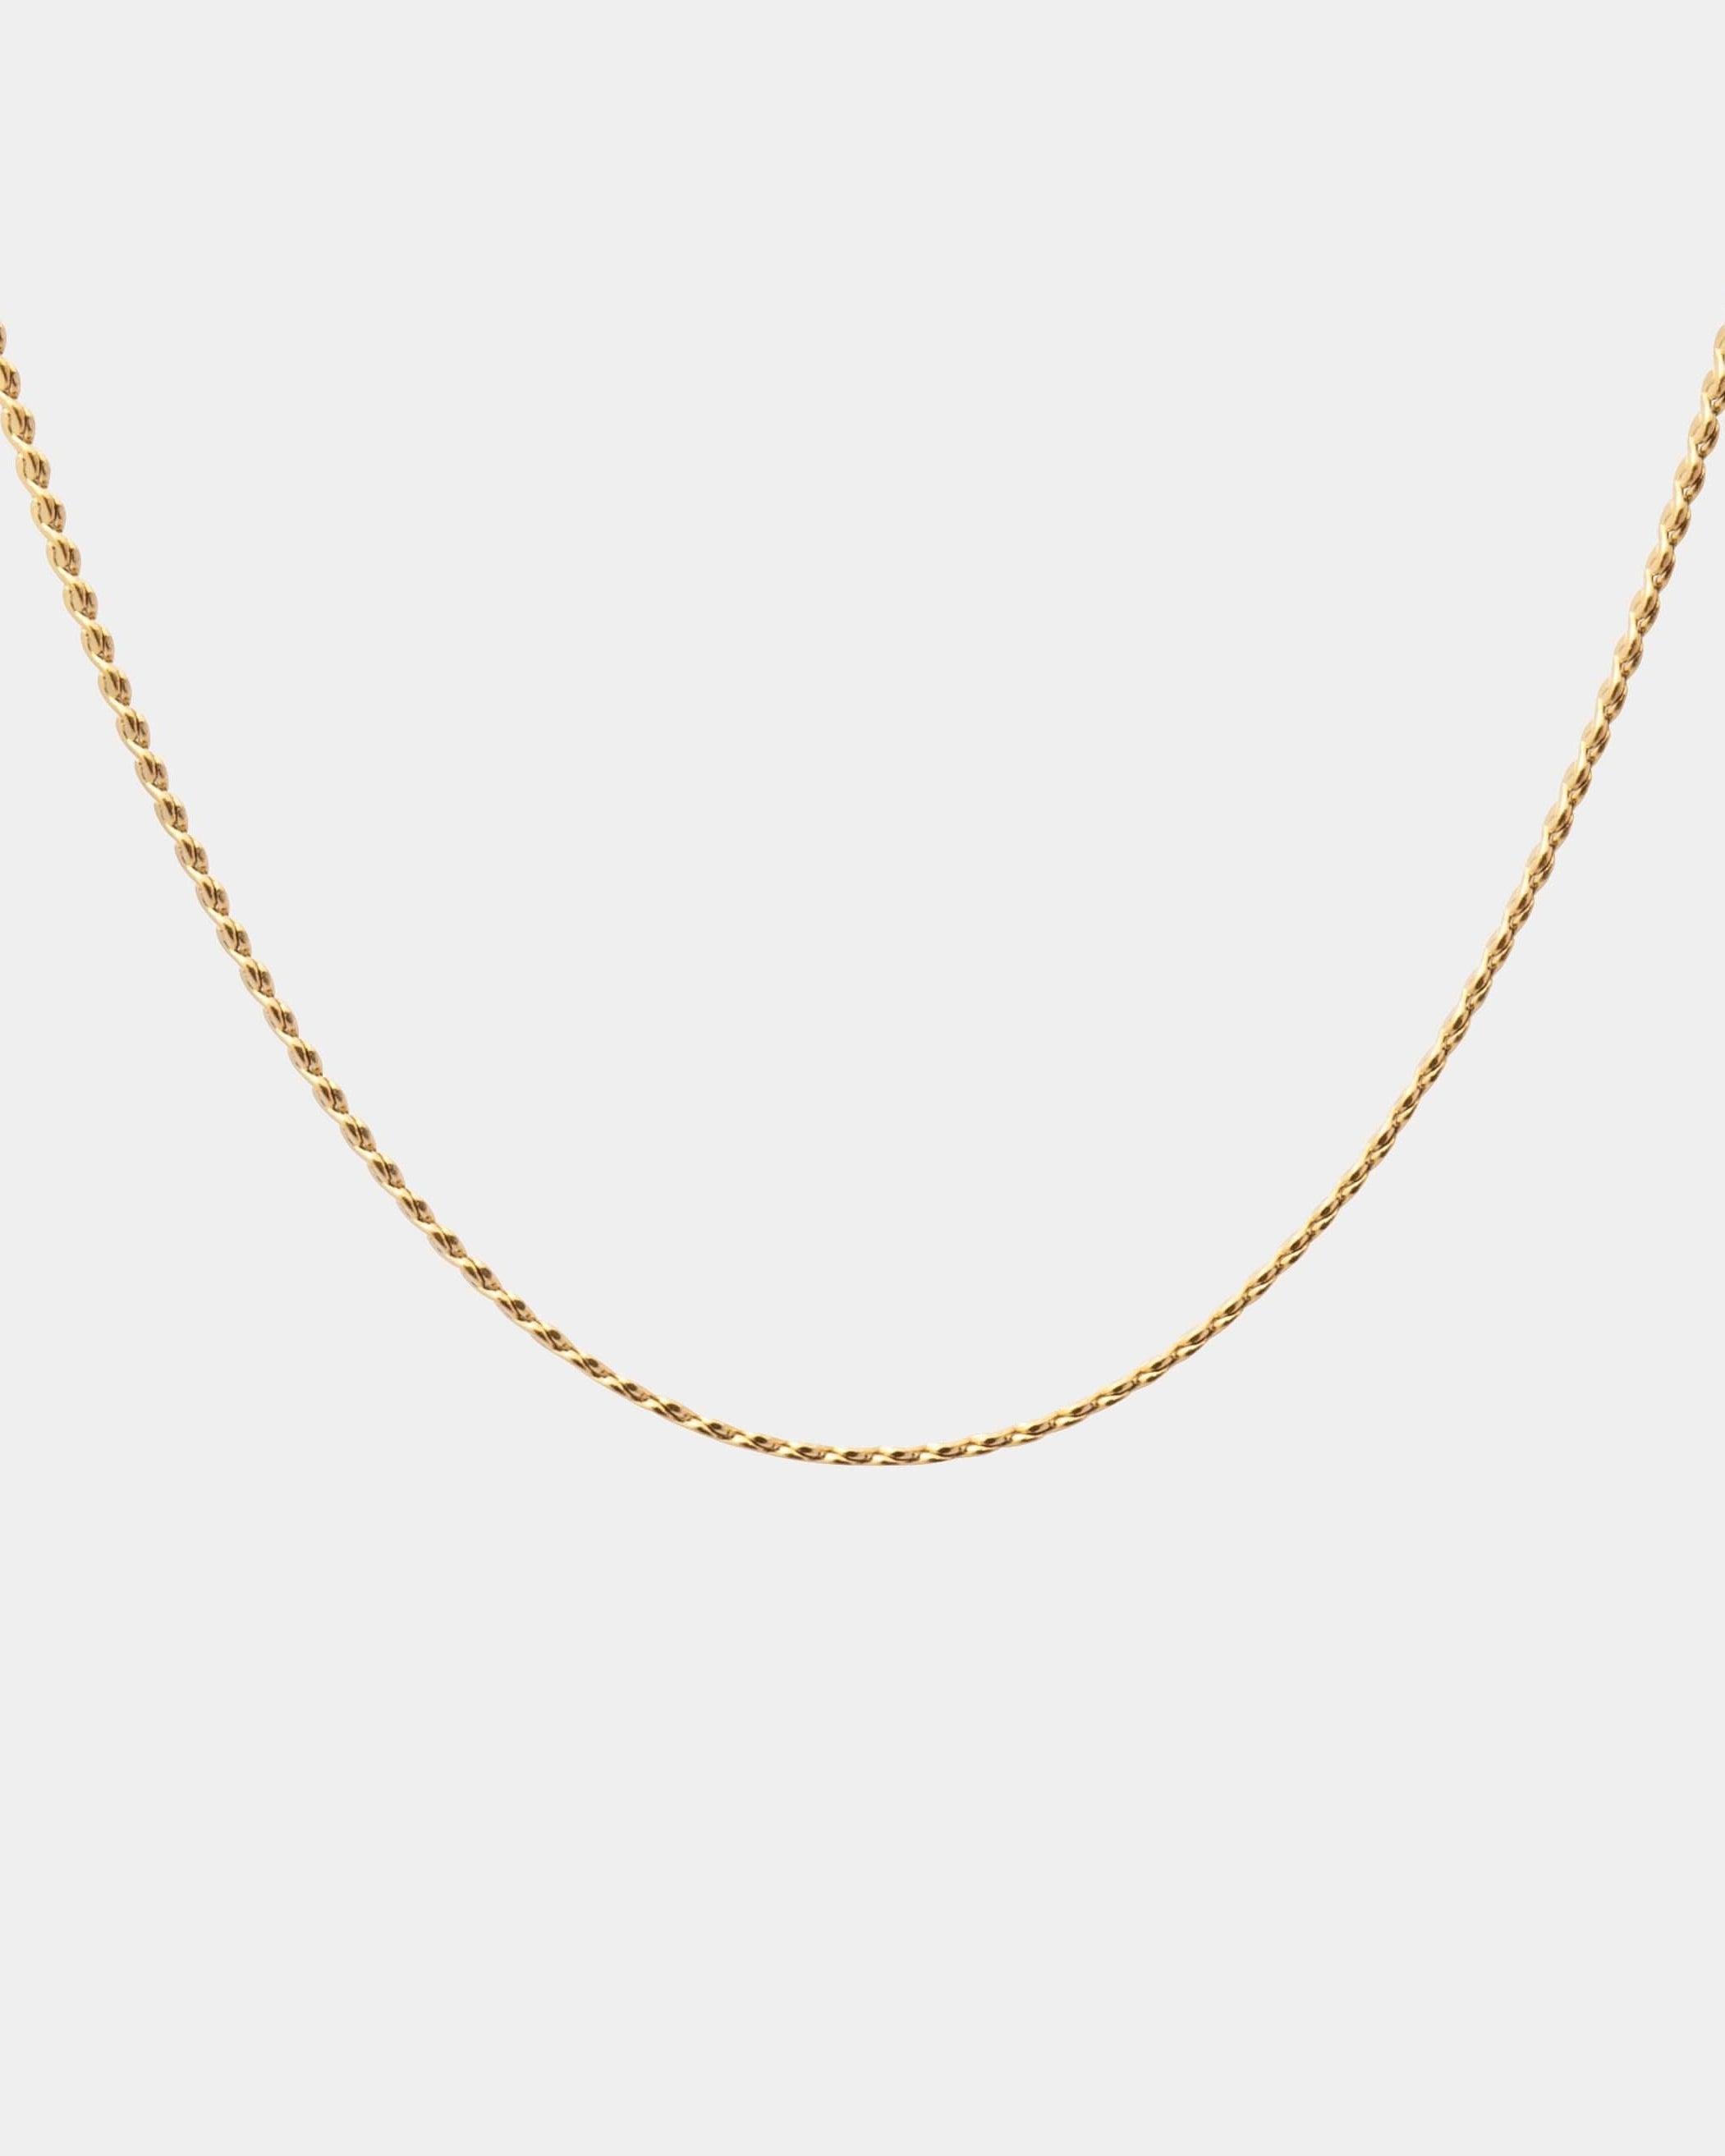 ROPE CHAIN NECKLACE - LIMELY